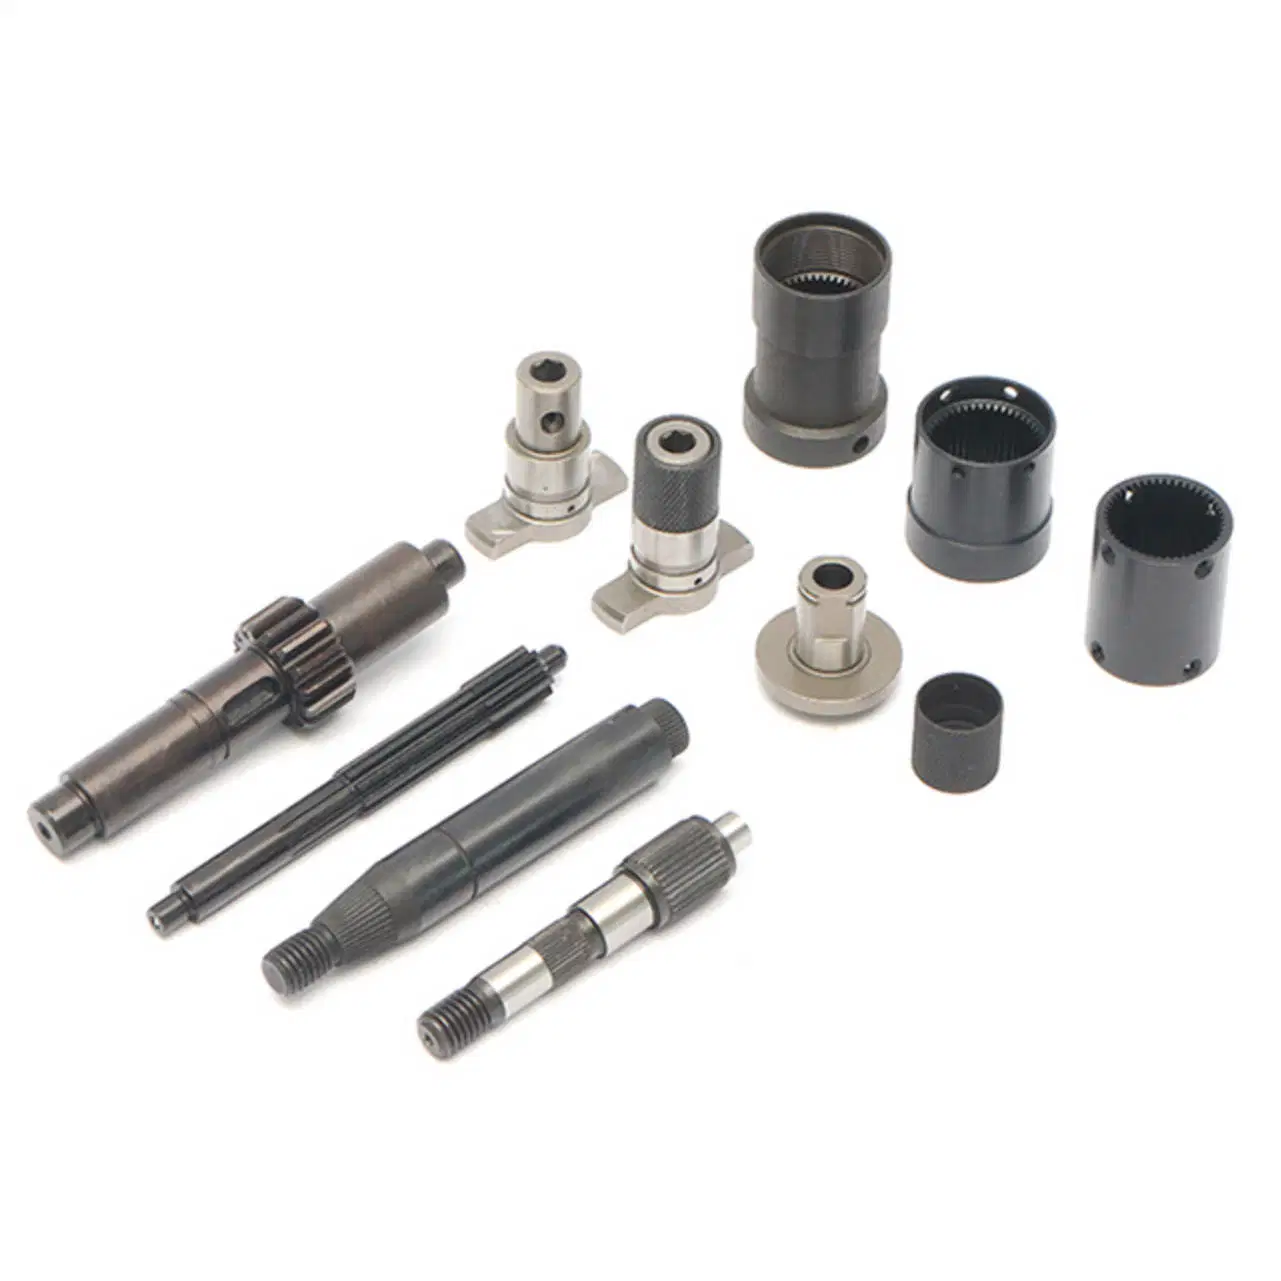 Gearbox Shafts, Transmission Shafts, Quick Clamps, Clutch Discs, Gardening Tool Parts